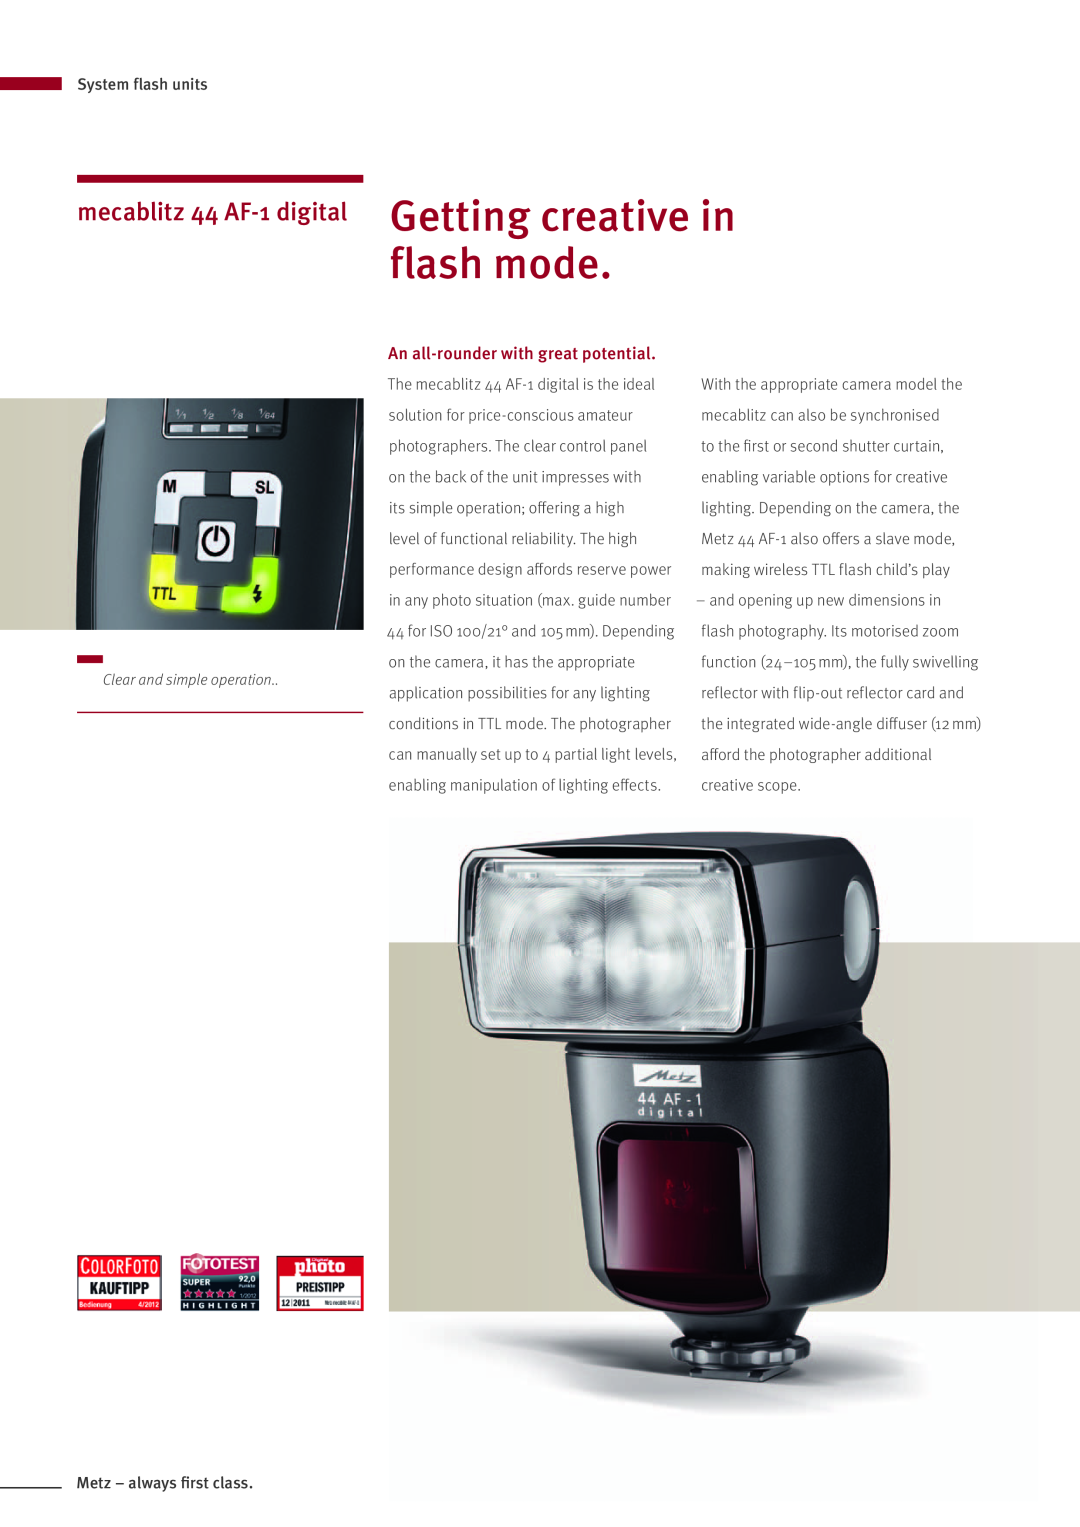 Metz MZ 44314N manual flash mode, mecablitz 44 AF-1 digital Getting creative in, An all-rounder with great potential 